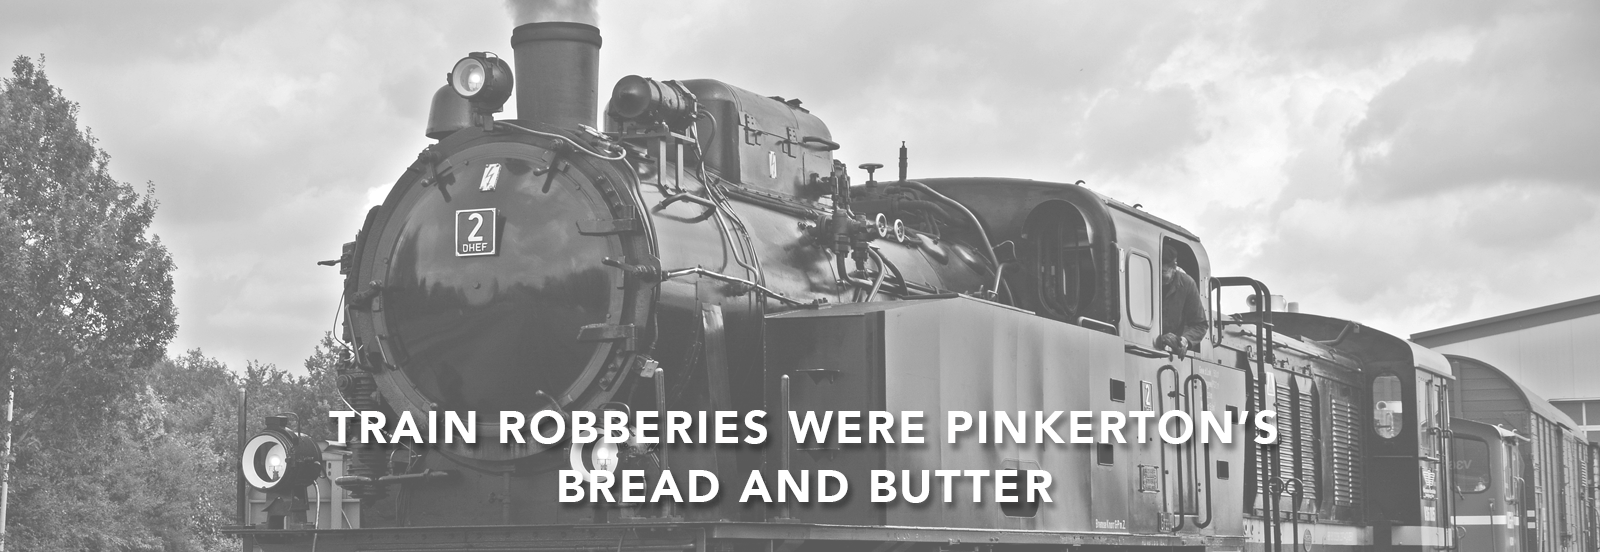 Allen Pinkerton solved a number of train robberies in his day